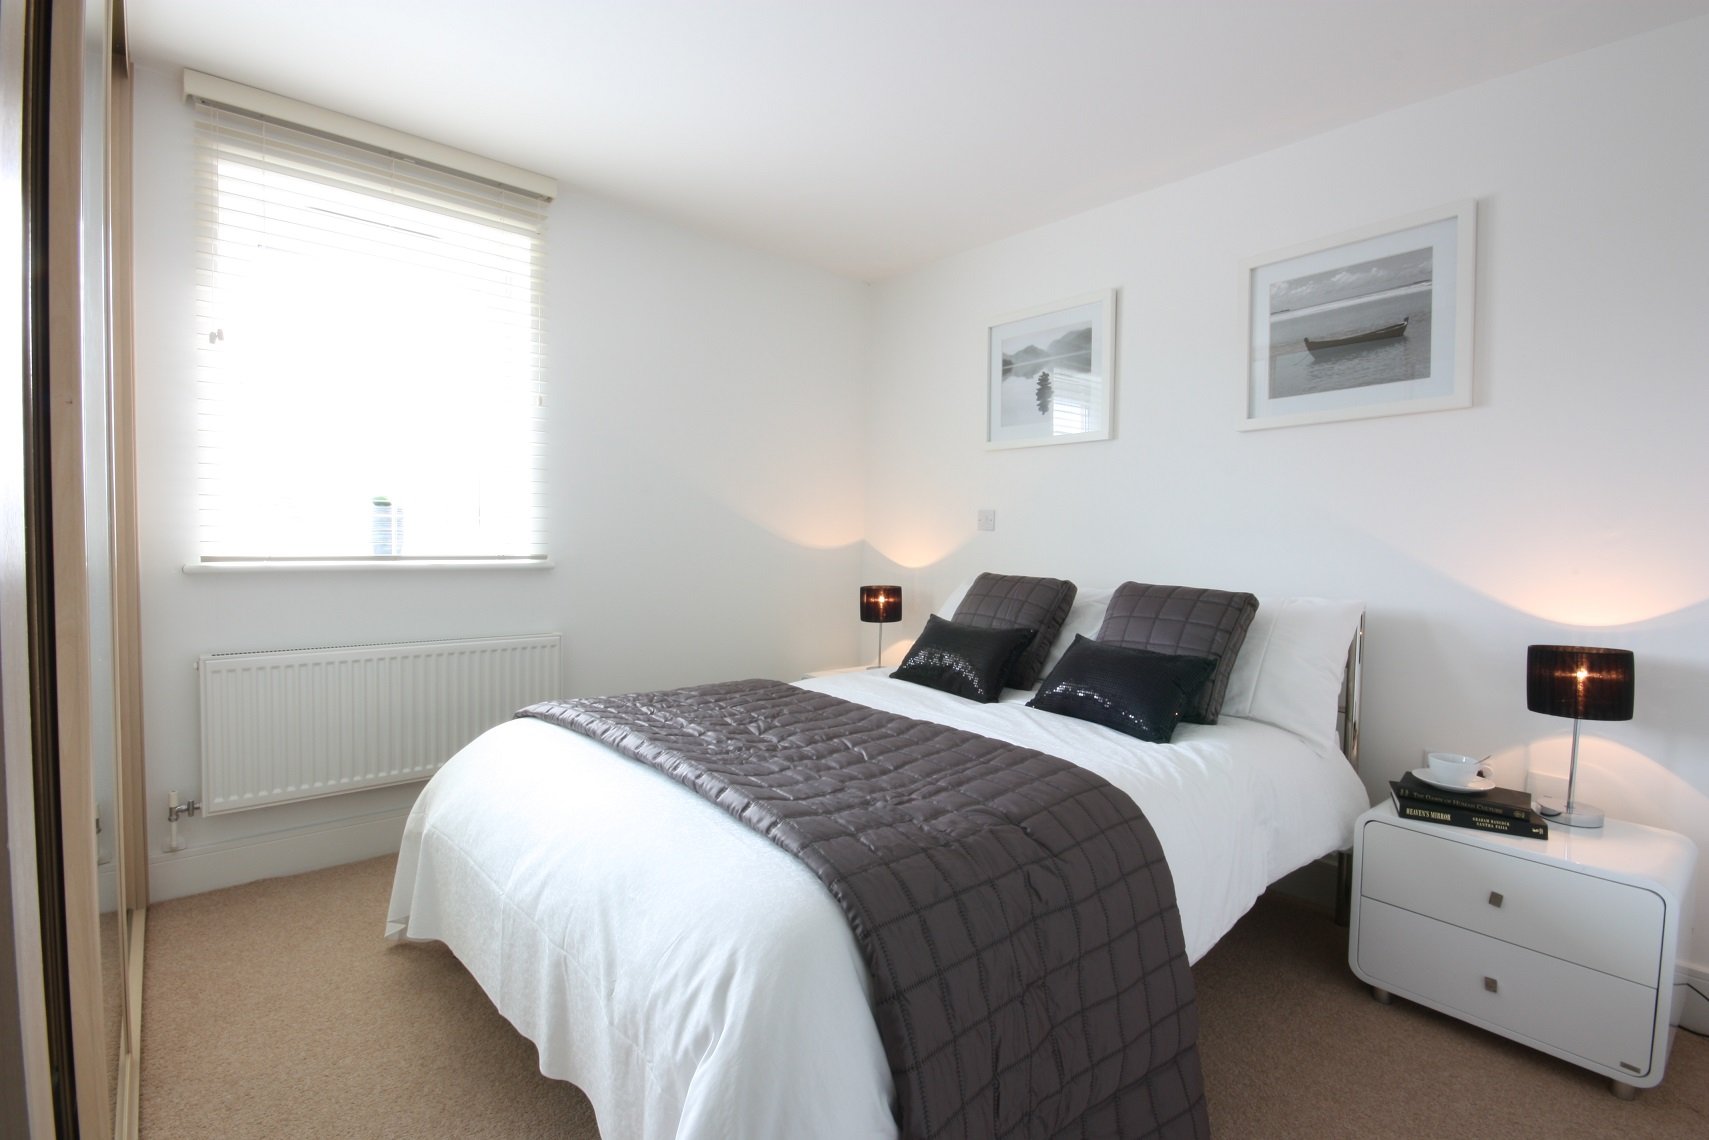 Windsor-Serviced-Accommodation,-Berkshire,-UK!-Including-HD-TV-with-Full-Sky-Package-&-On-site-Parking!-BOOK-NOW-on-+44-208-691-3920-for-the-best-rates!